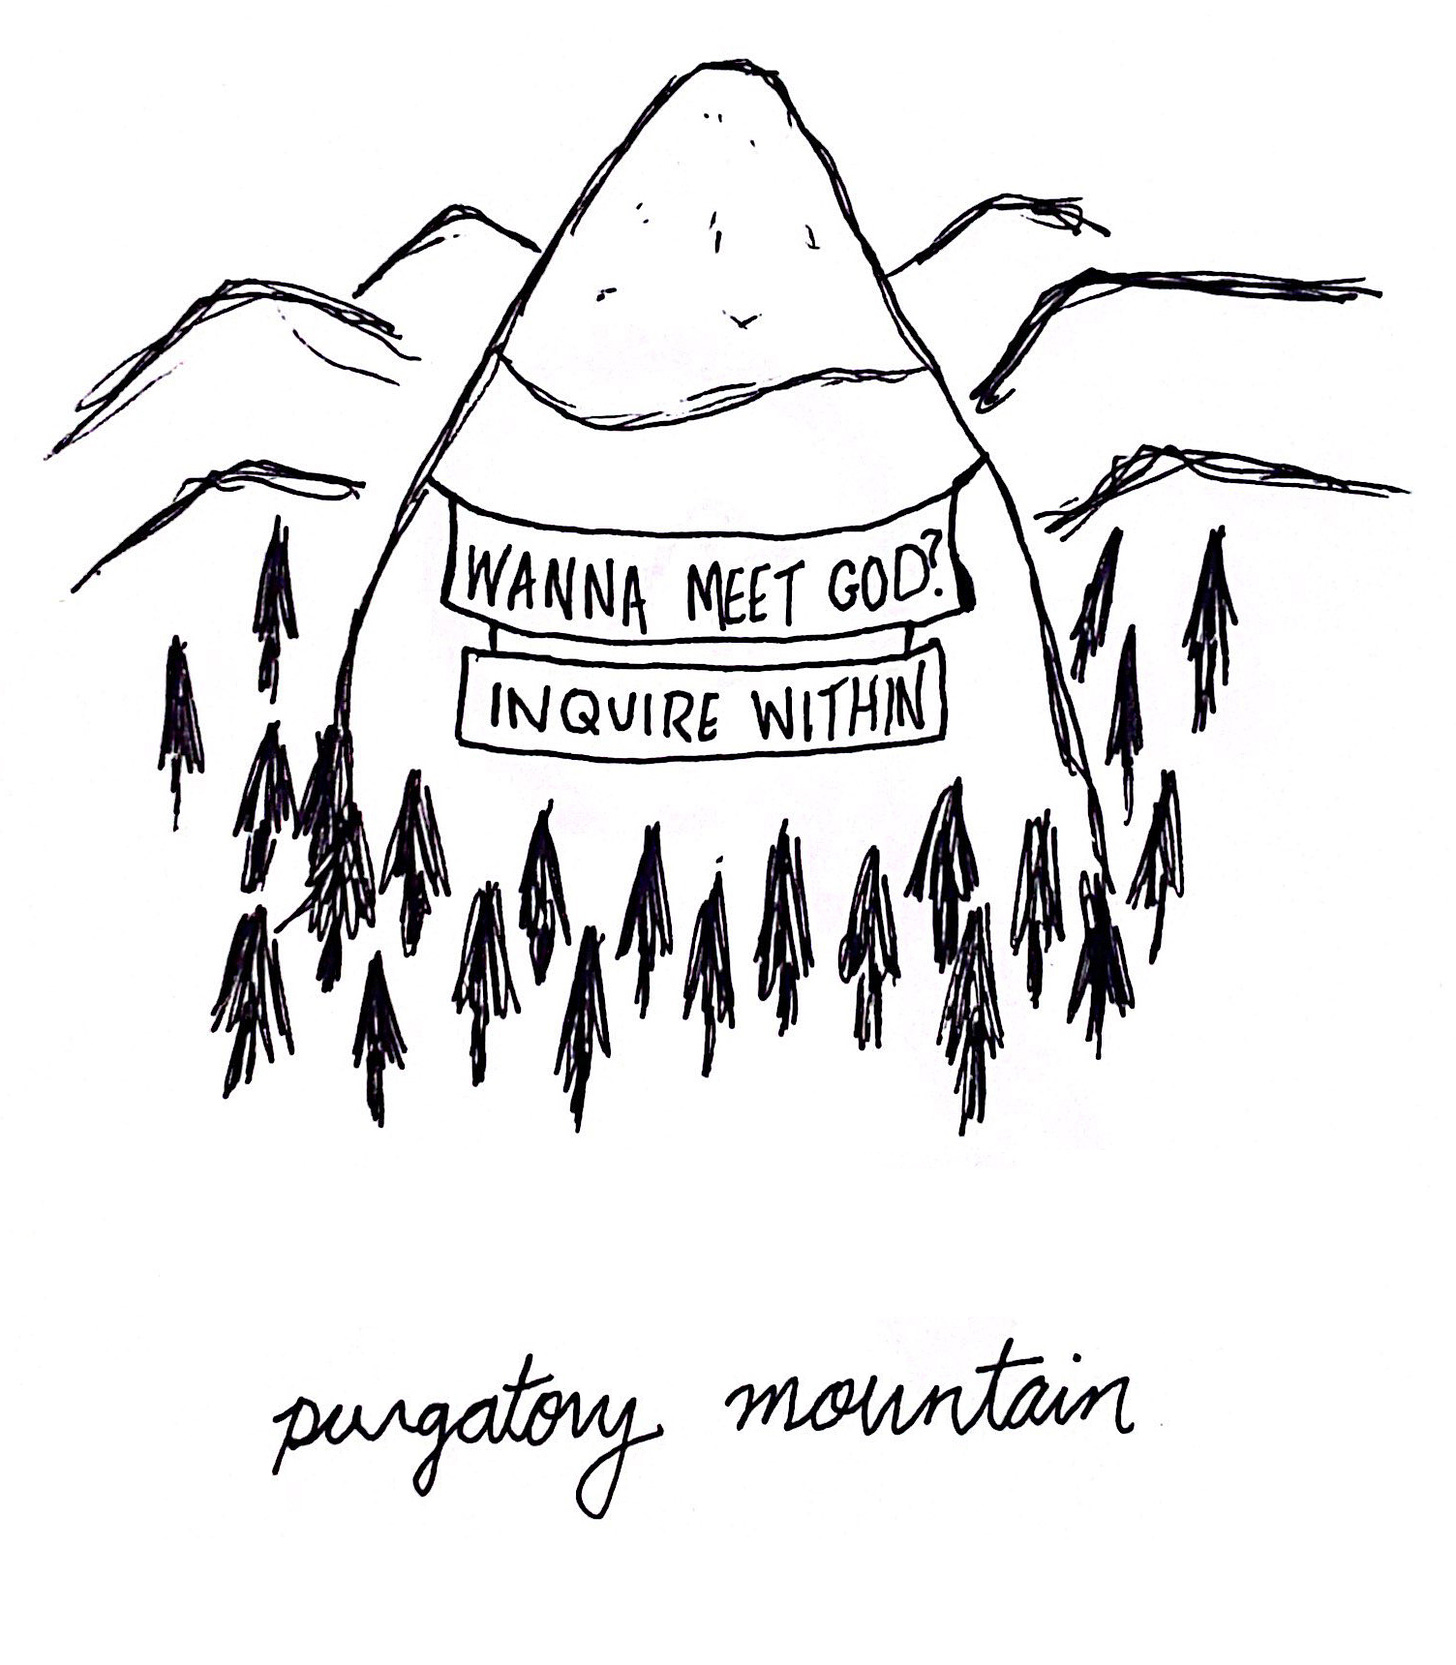 An illustration of Purgatory Mountain Ln. A large mountain in a range is surrounded by pine trees. A banner on the mountain reads "Wanna meet god? Inquire within"